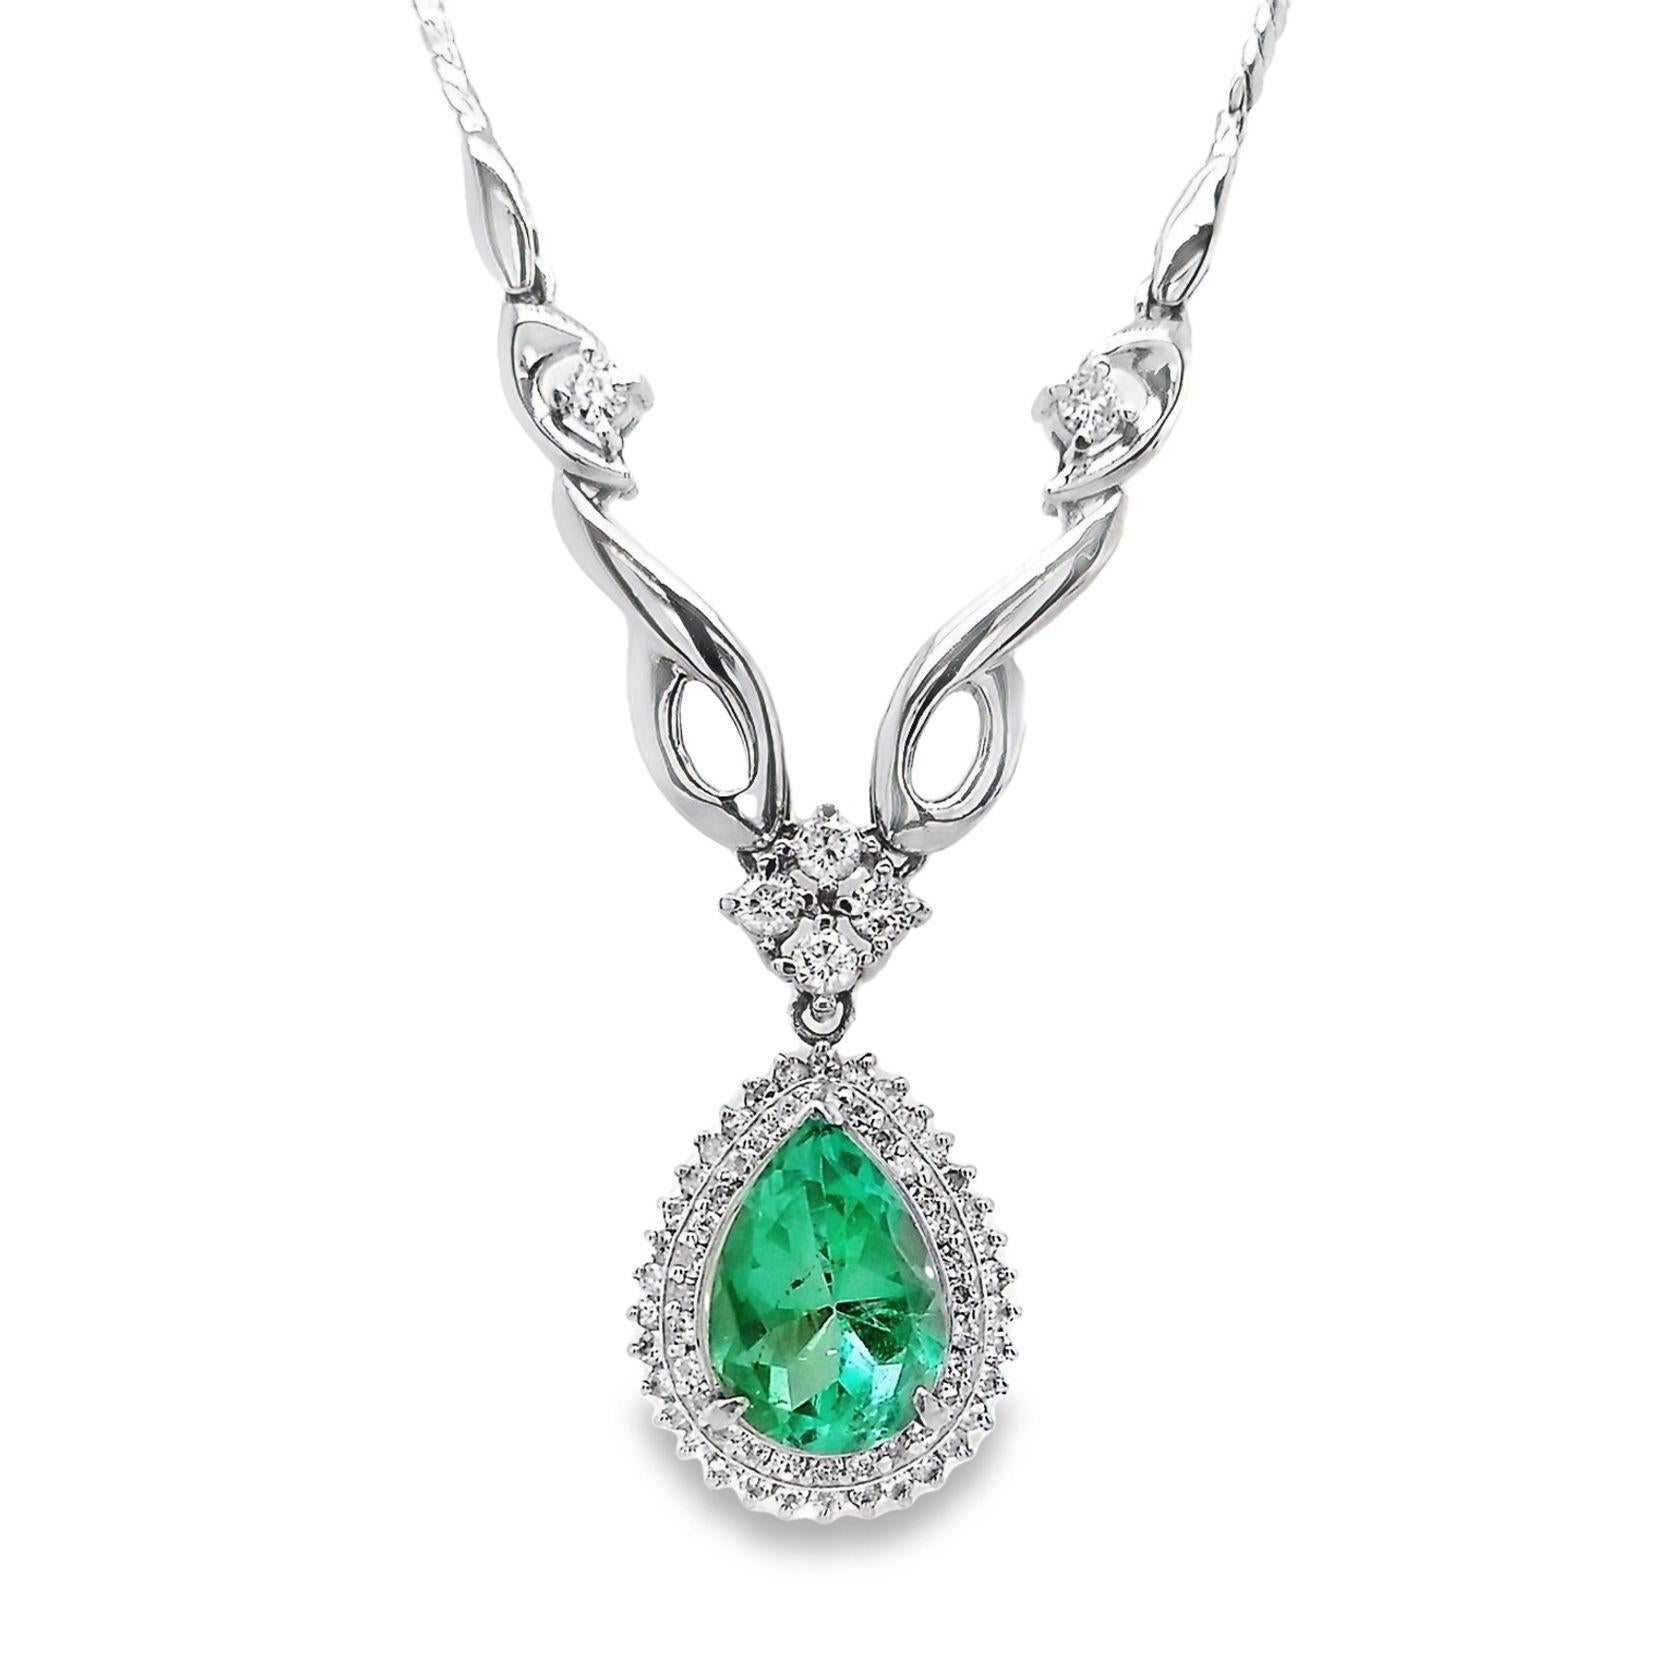 IGI Certified 2.51ct Colombia Emerald and 0.76ct Natural Diamonds Necklace